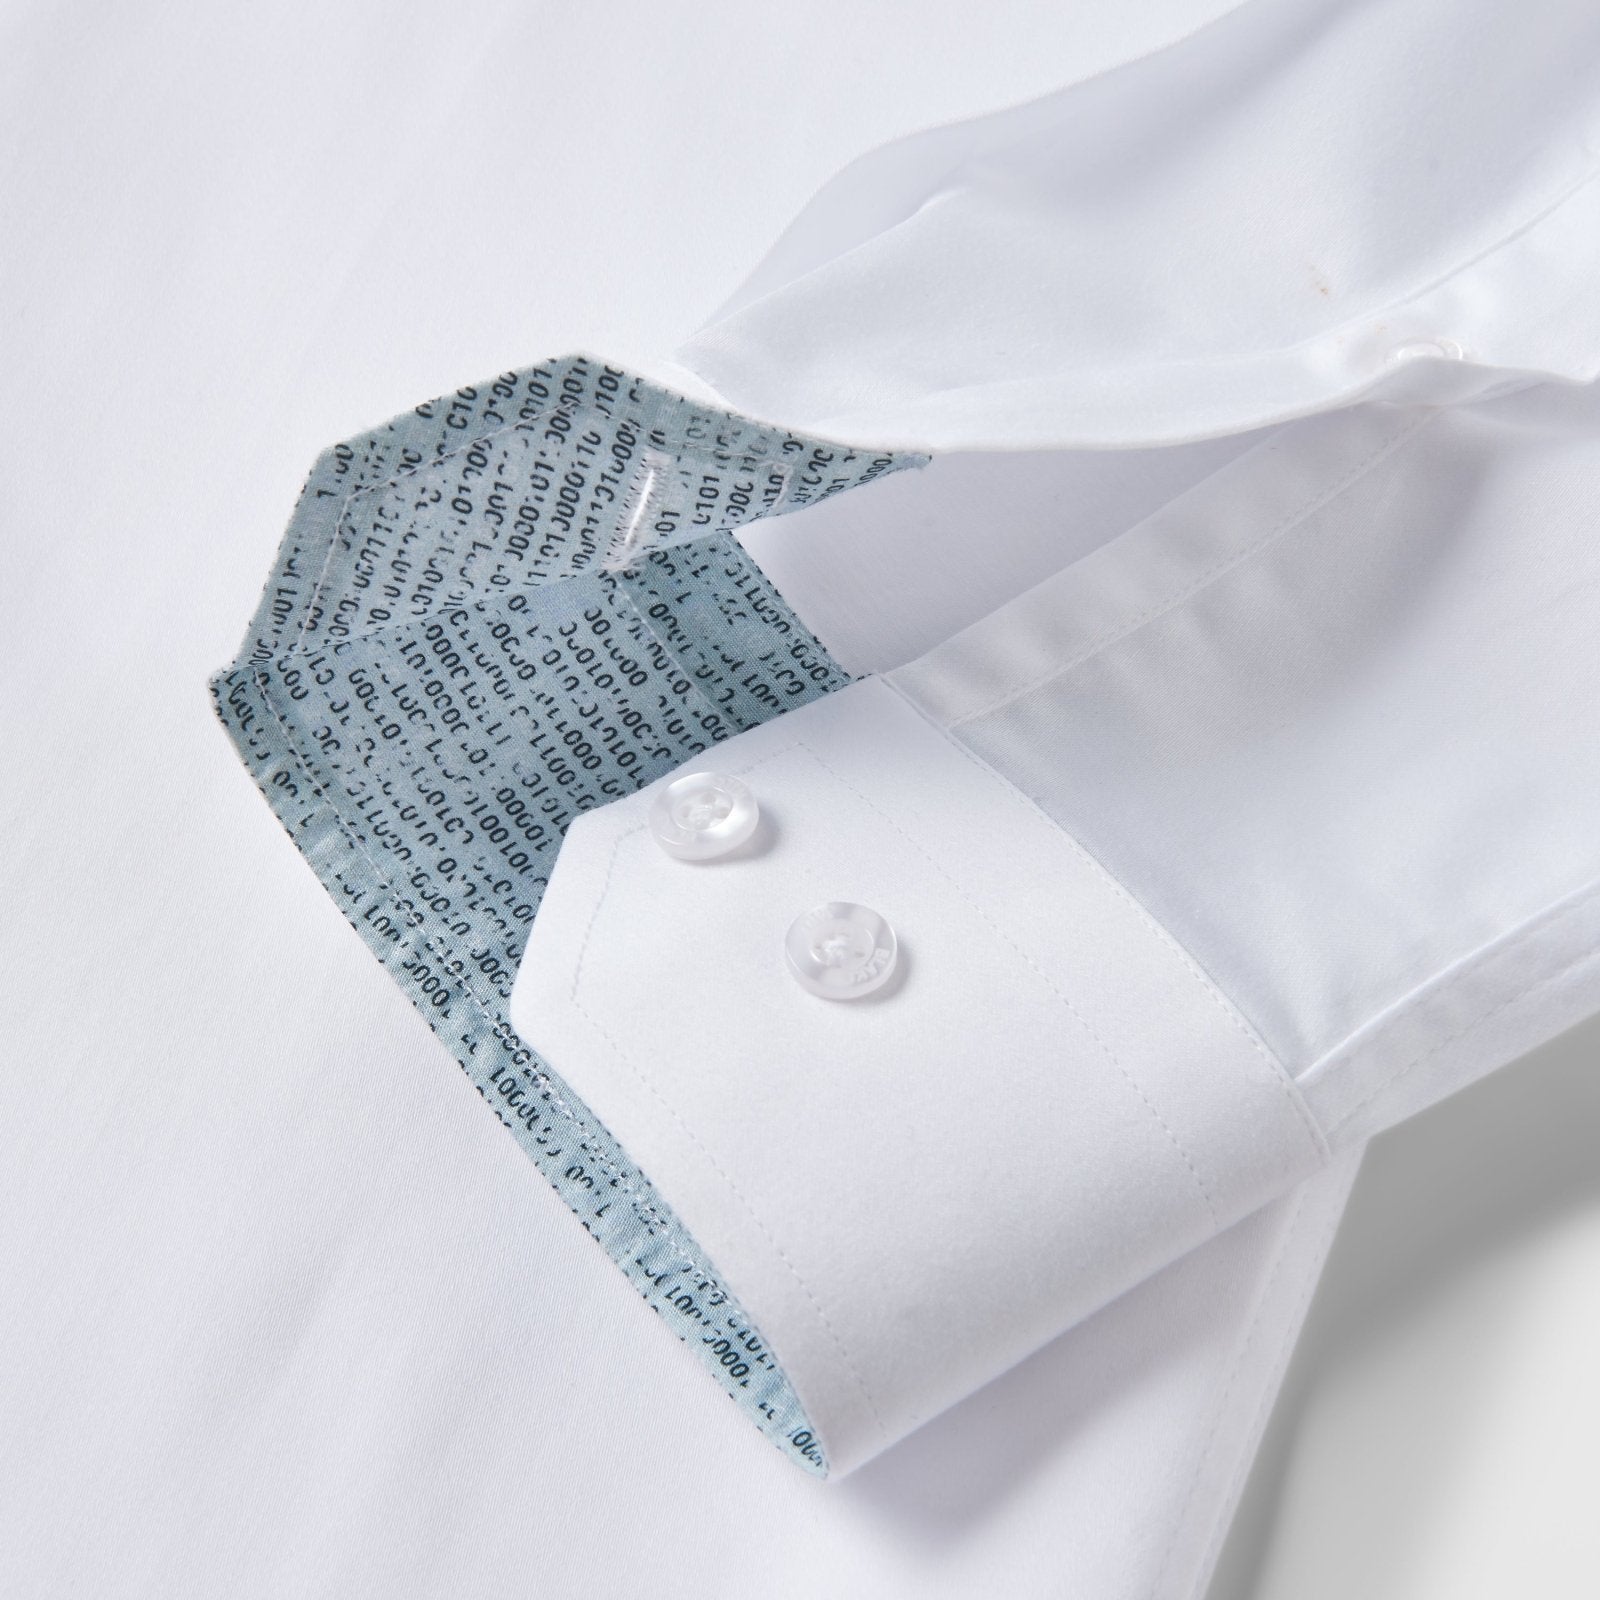 White with Teal Burn Baby Burn Accents Shirt - Blake Mill